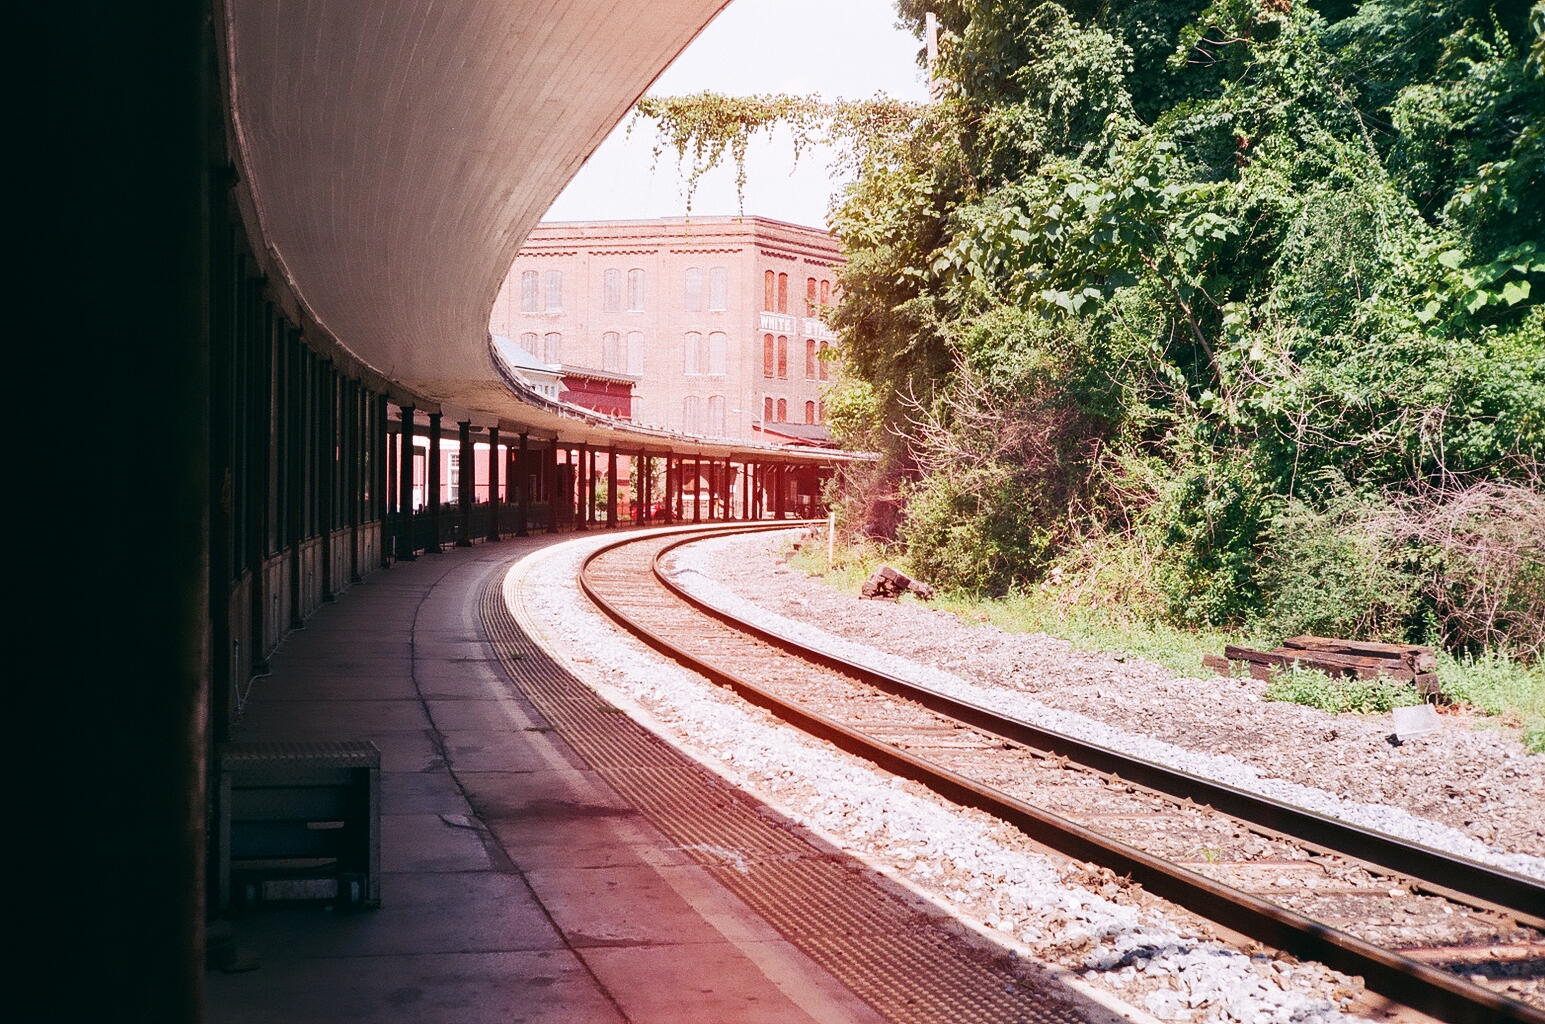 A film photo of a train station